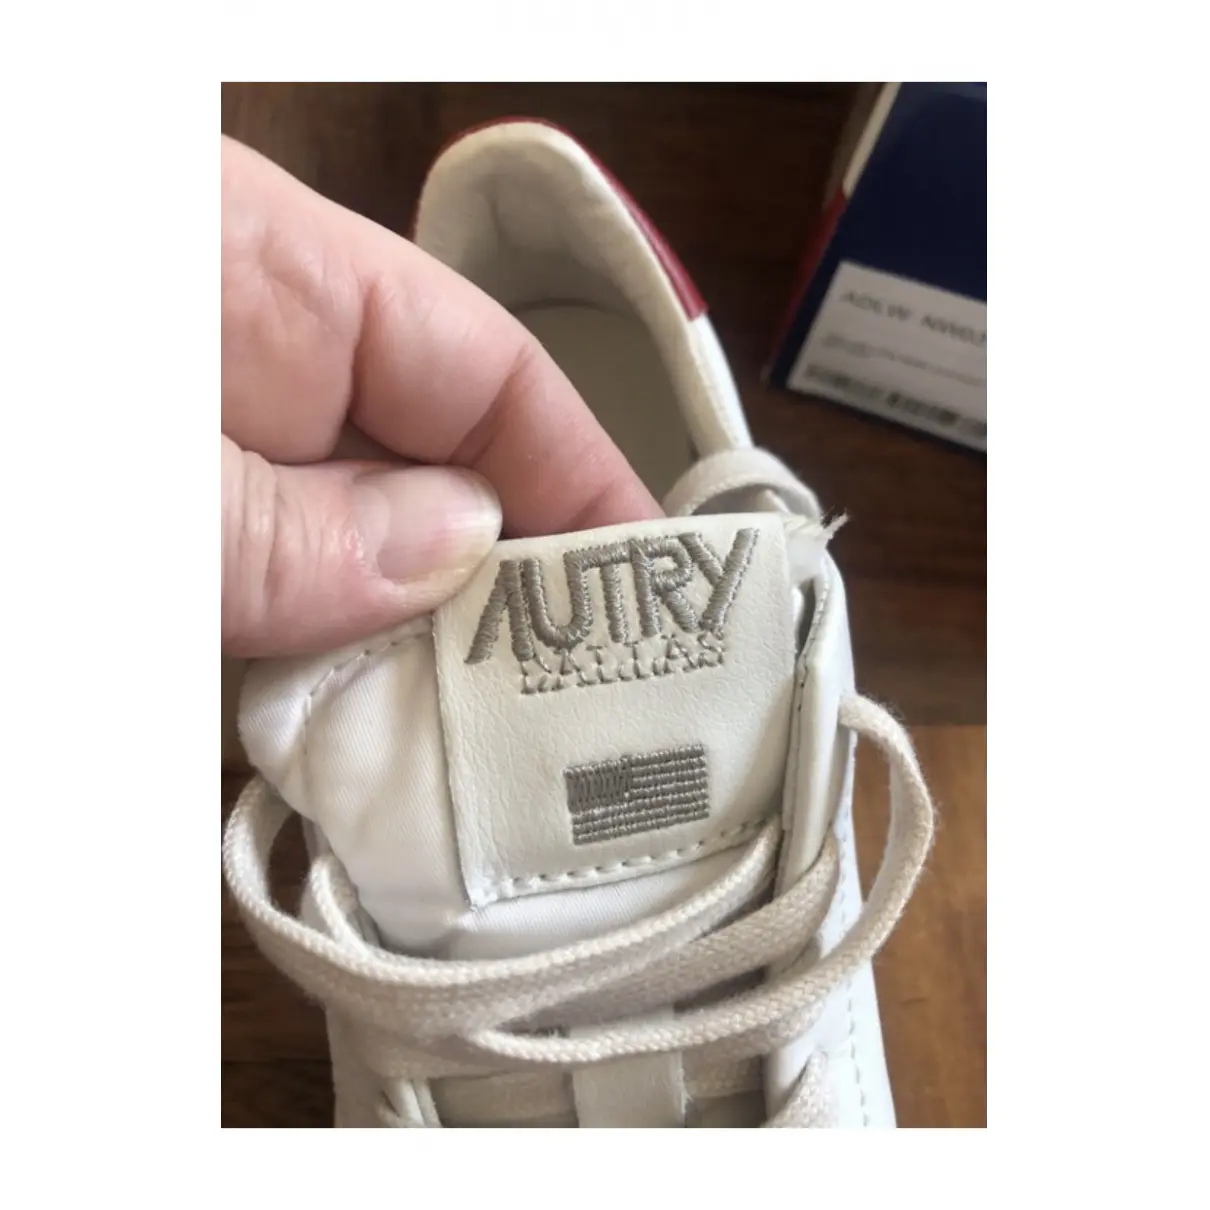 Leather trainers Autry